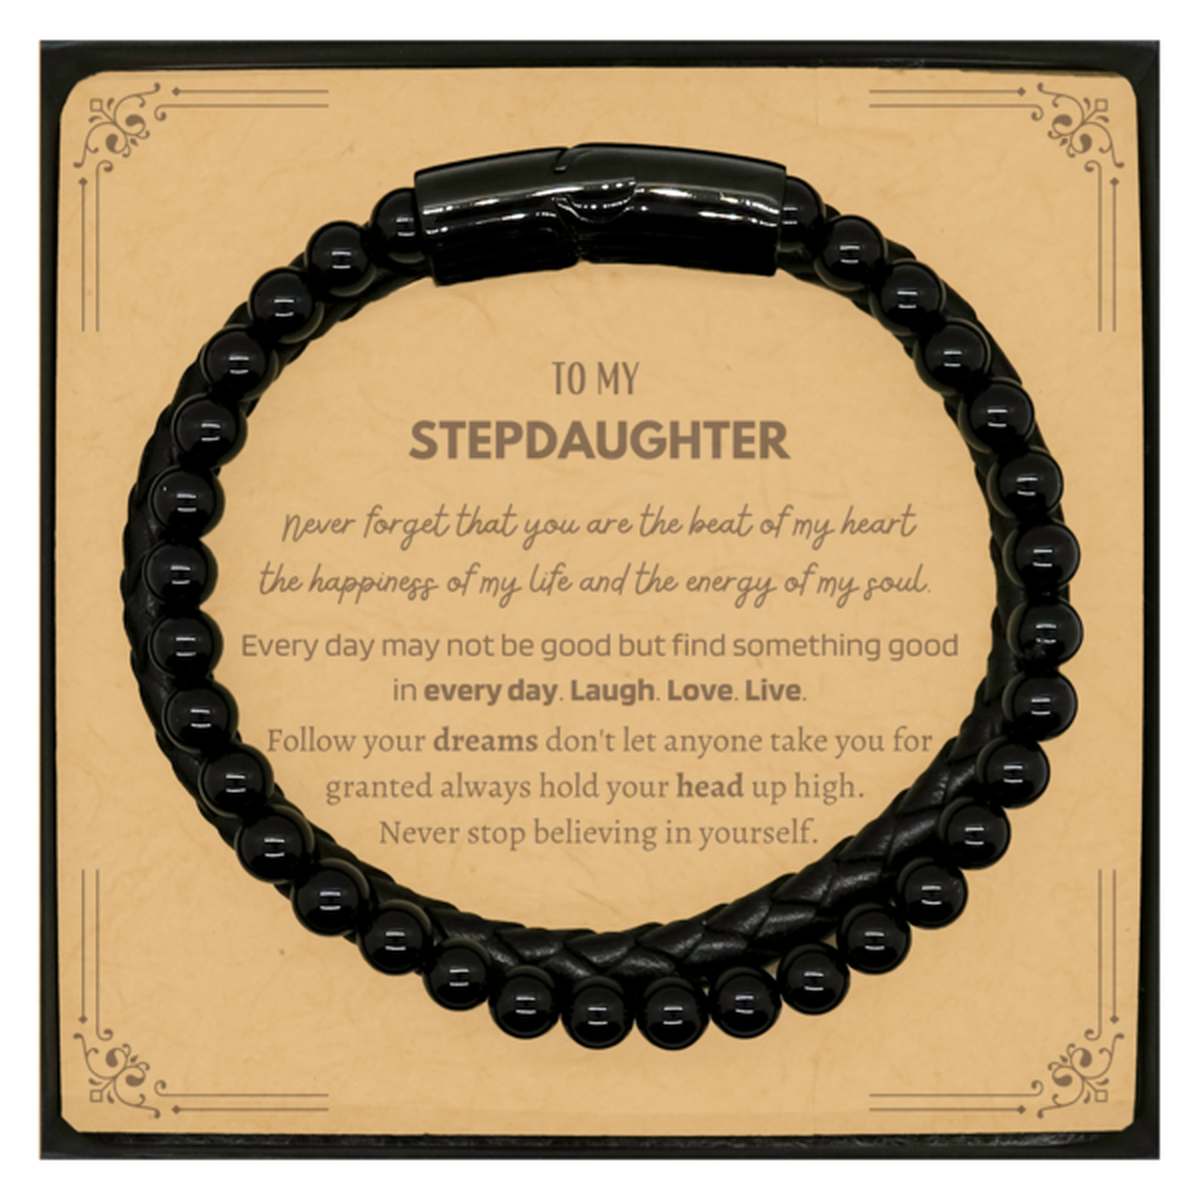 To My Stepdaughter Message Card Gifts, Christmas Stepdaughter Stone Leather Bracelets Present, Birthday Unique Motivational For Stepdaughter, To My Stepdaughter Never forget that you are the beat of my heart the happiness of my life and the energy of my s